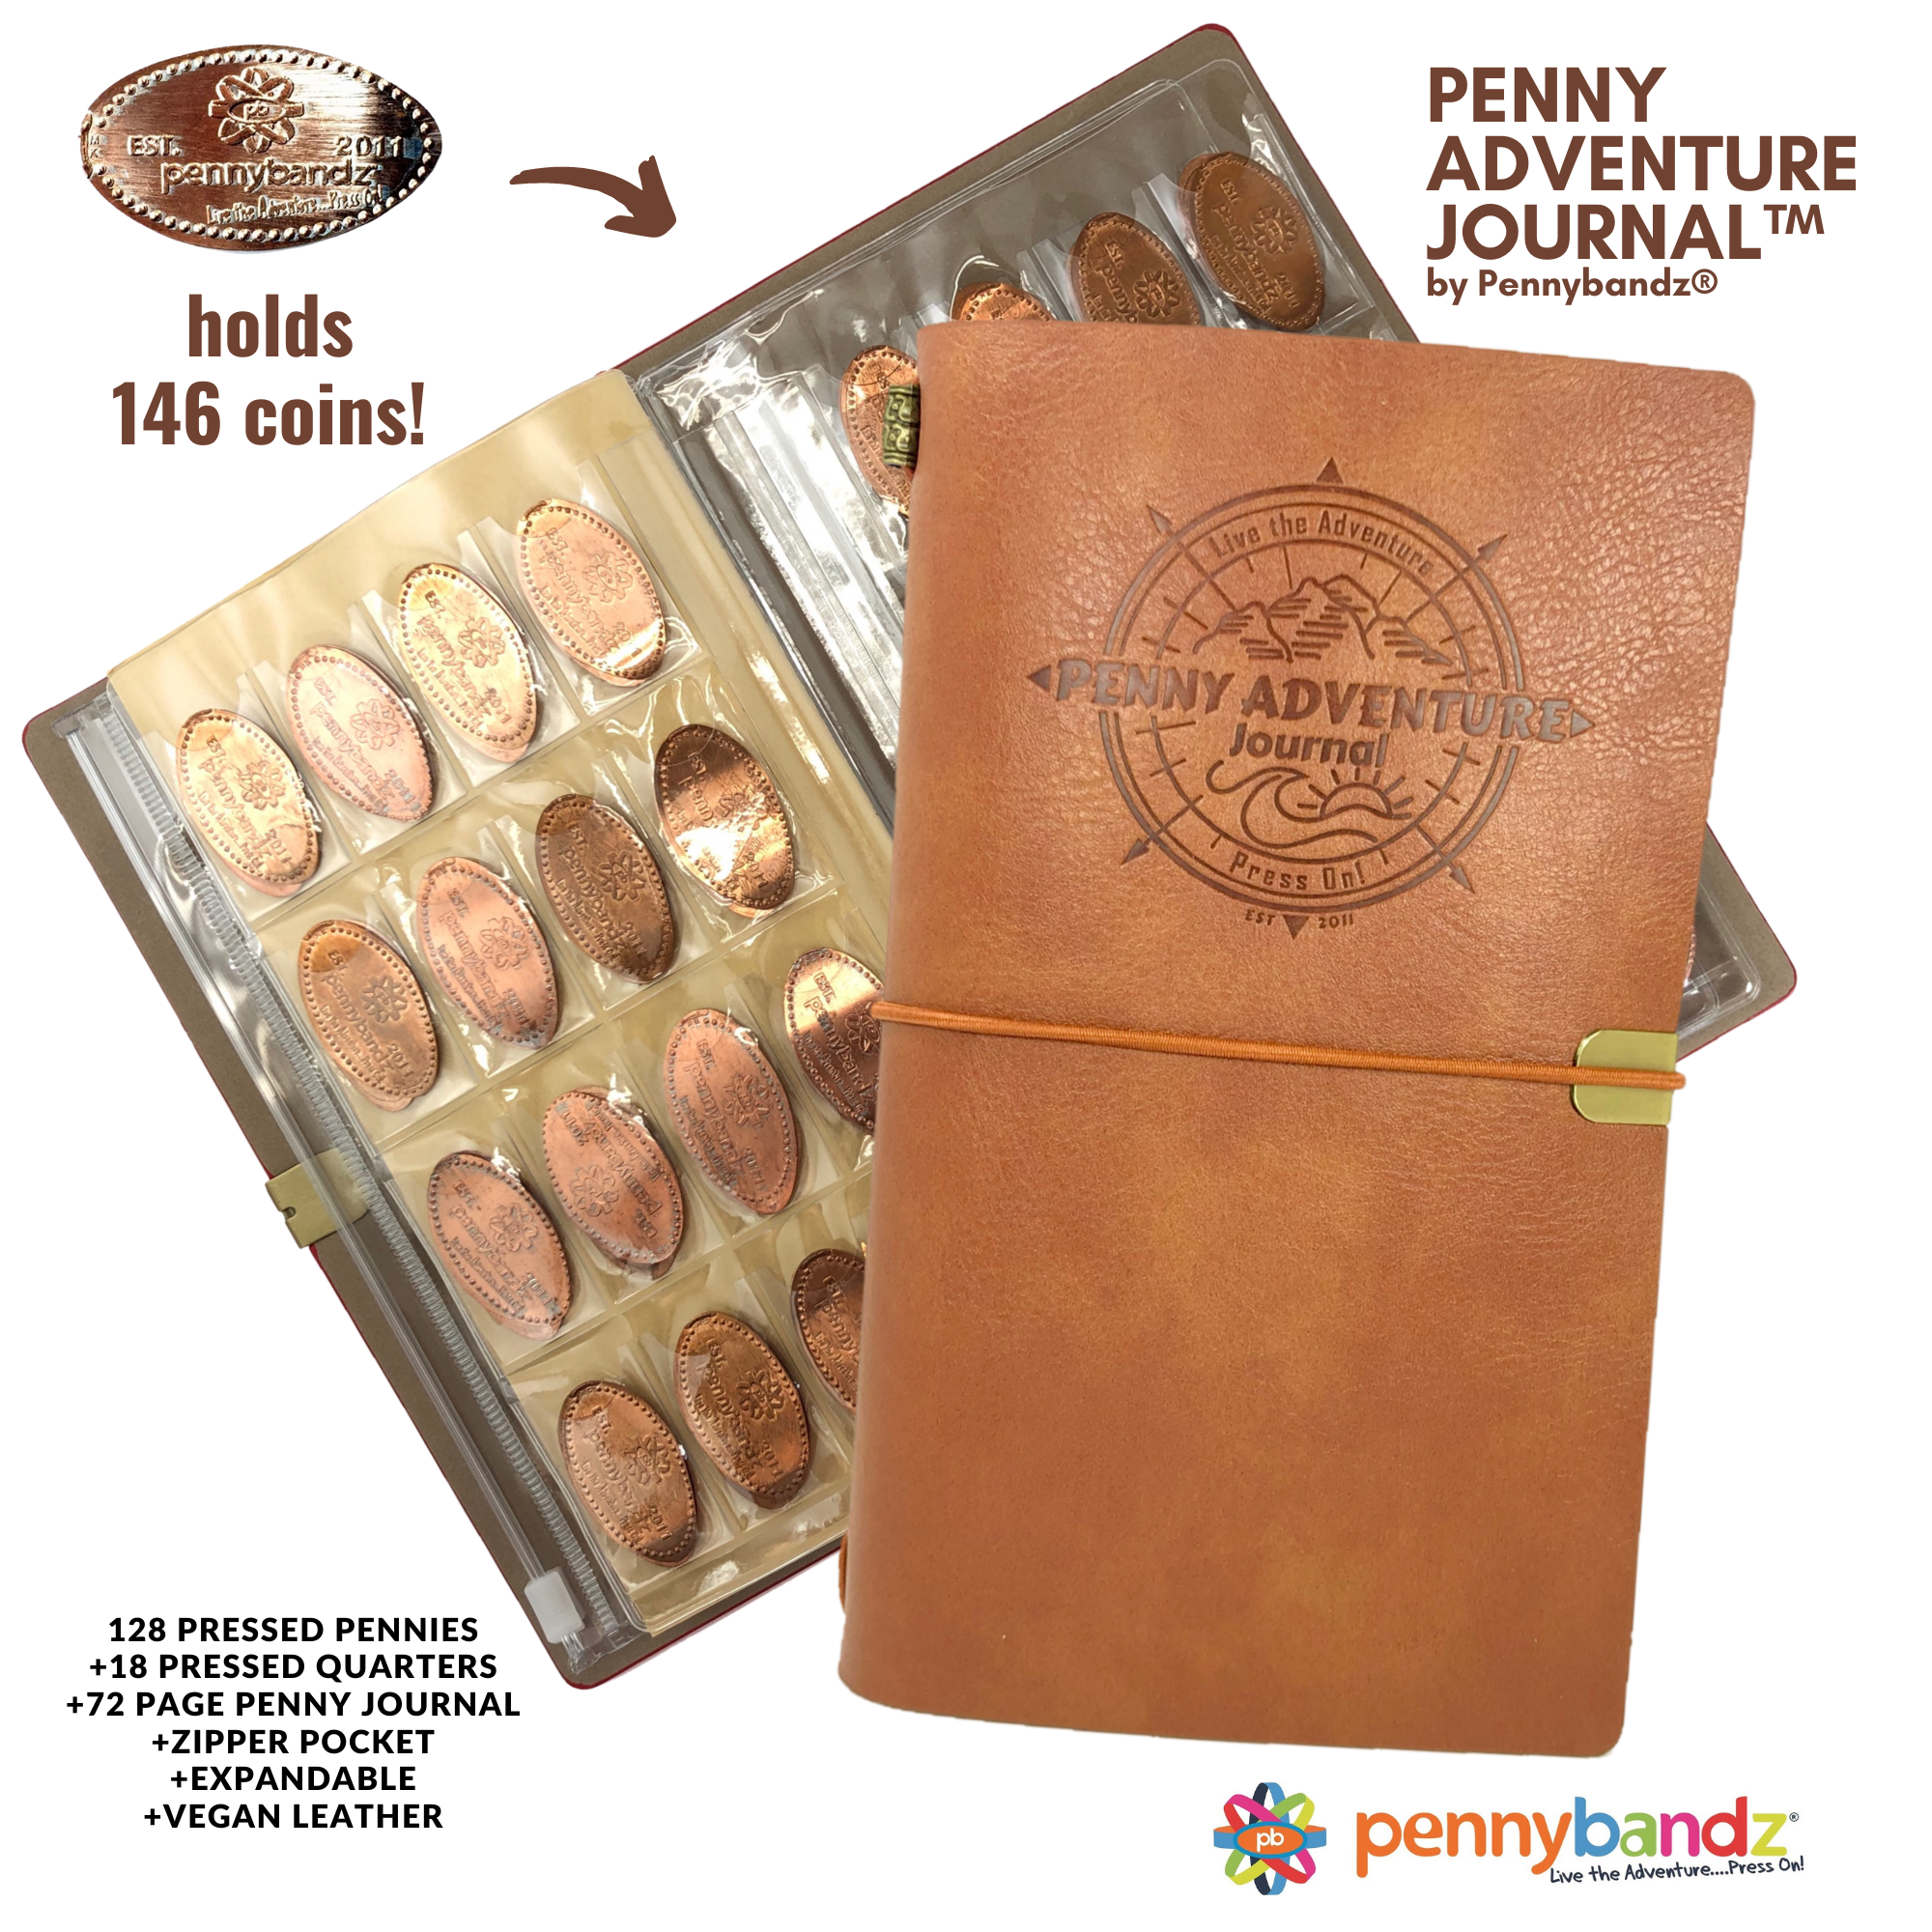 The Penny Journal™ the pressed penny book for all penny collectors